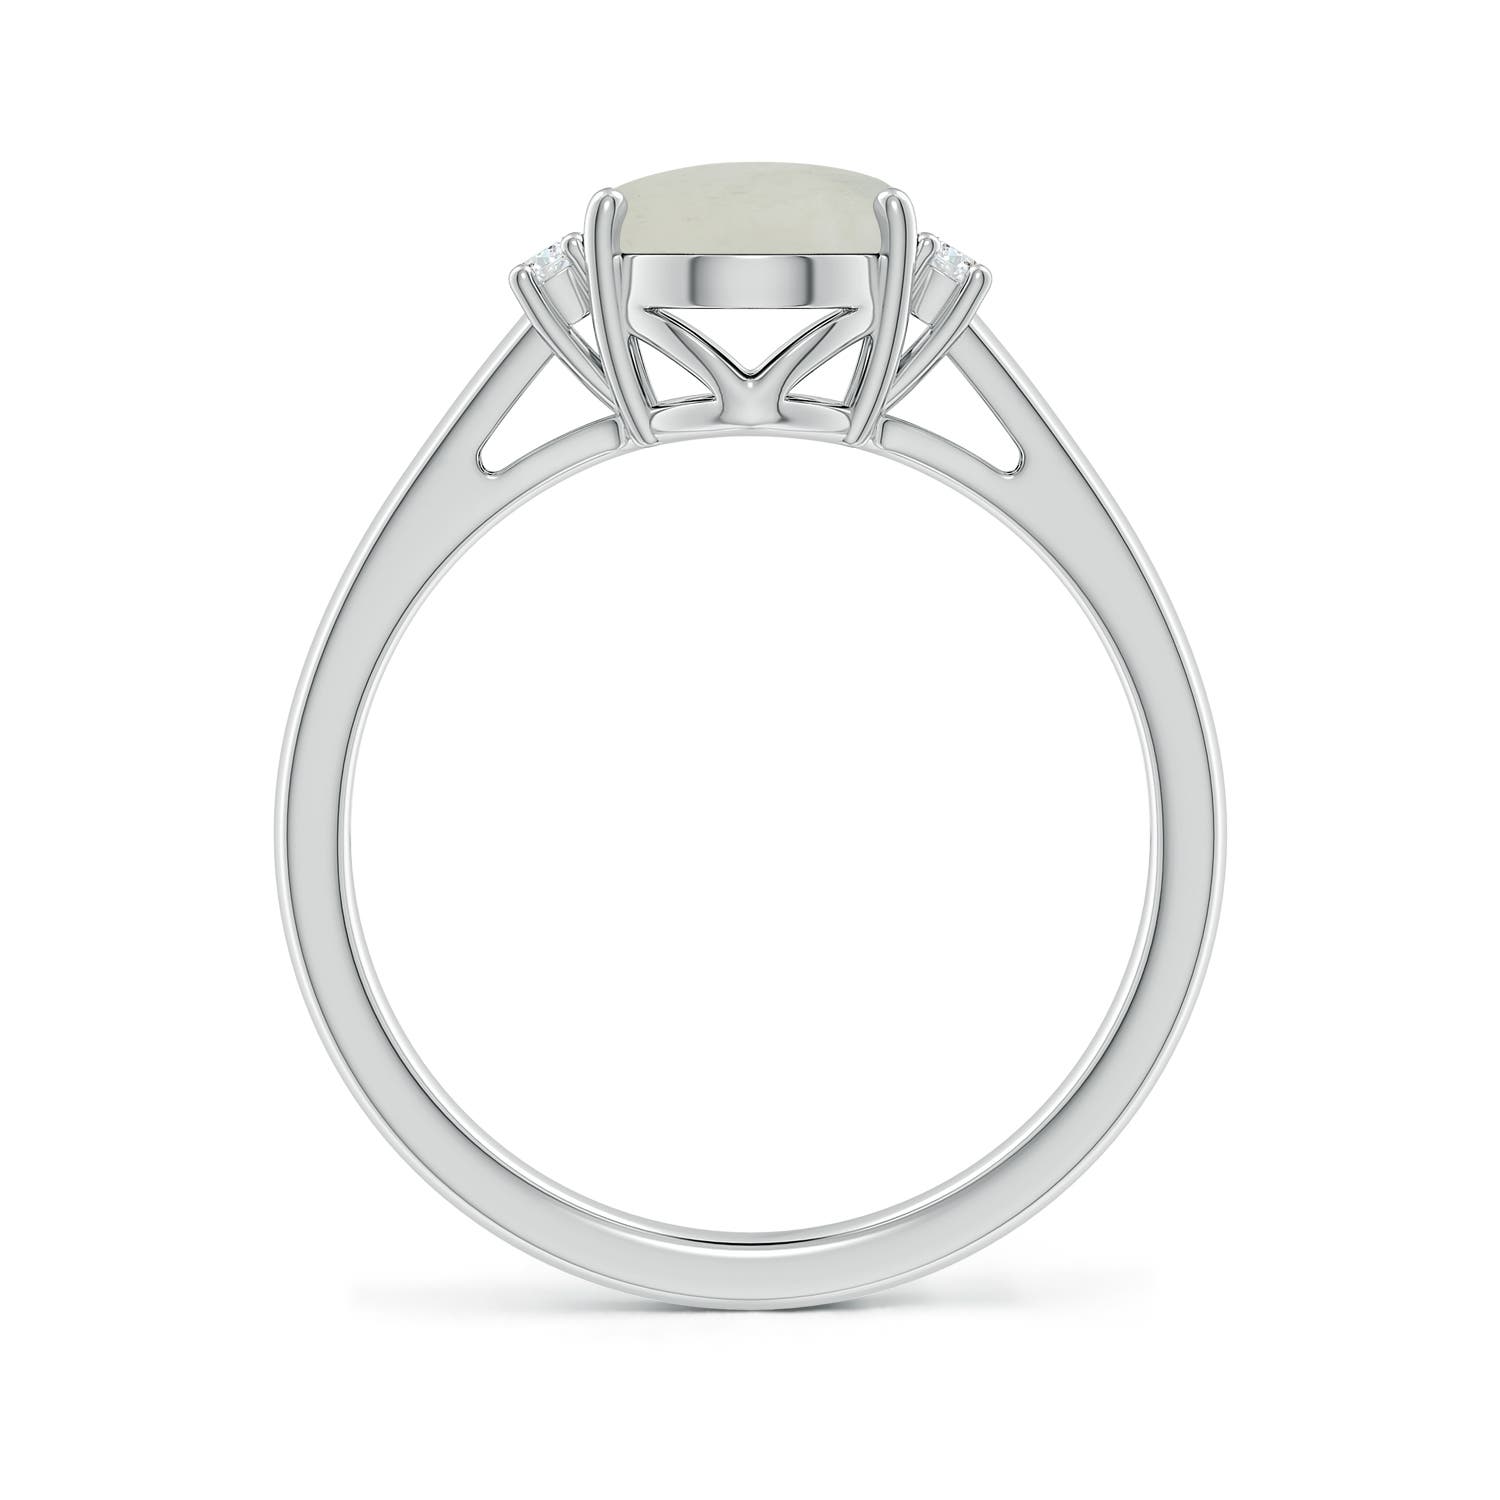 A - Moonstone / 1.8 CT / 14 KT White Gold